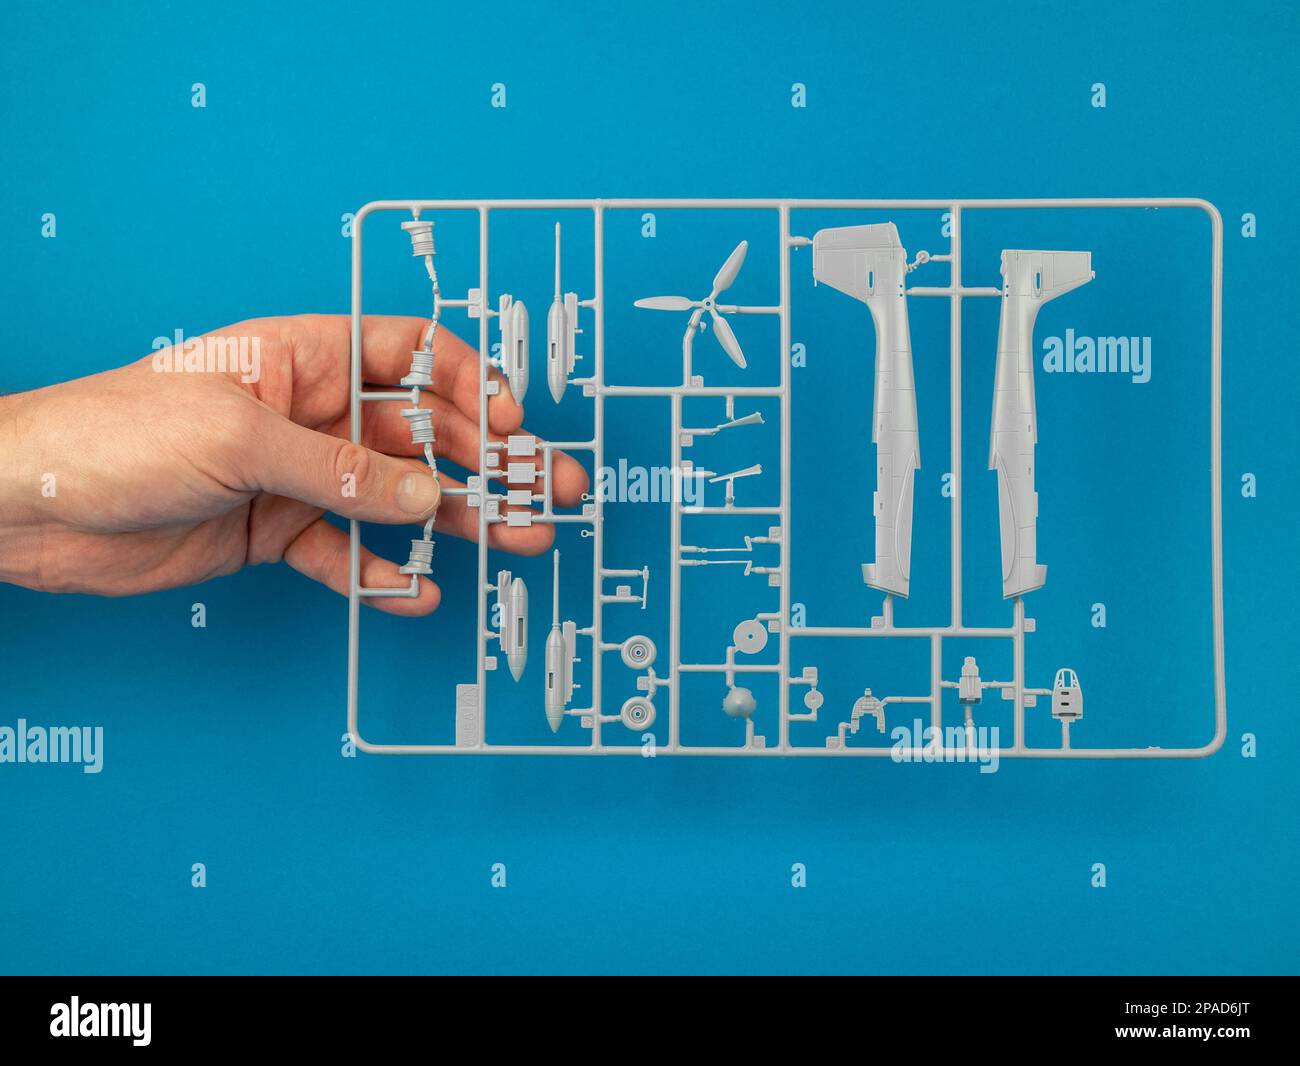 Sprue from a plastic model kit in hand on the blue background. Parts tree of the airplane model, close up. Building model aircraft, hobby concept Stock Photo